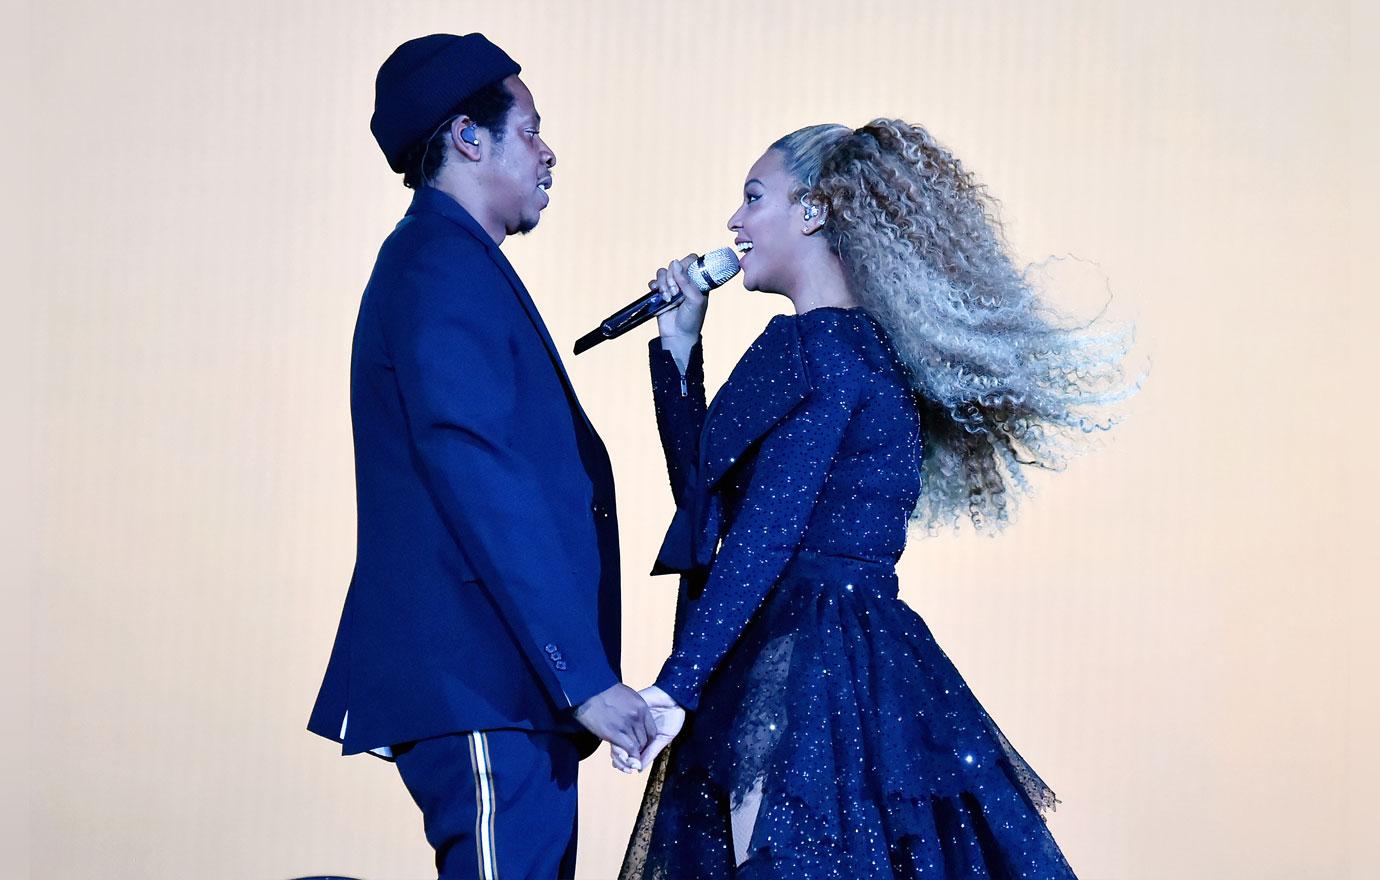 Jay Z joined on stage by 12 year old fan to perform 'Clique' – watch